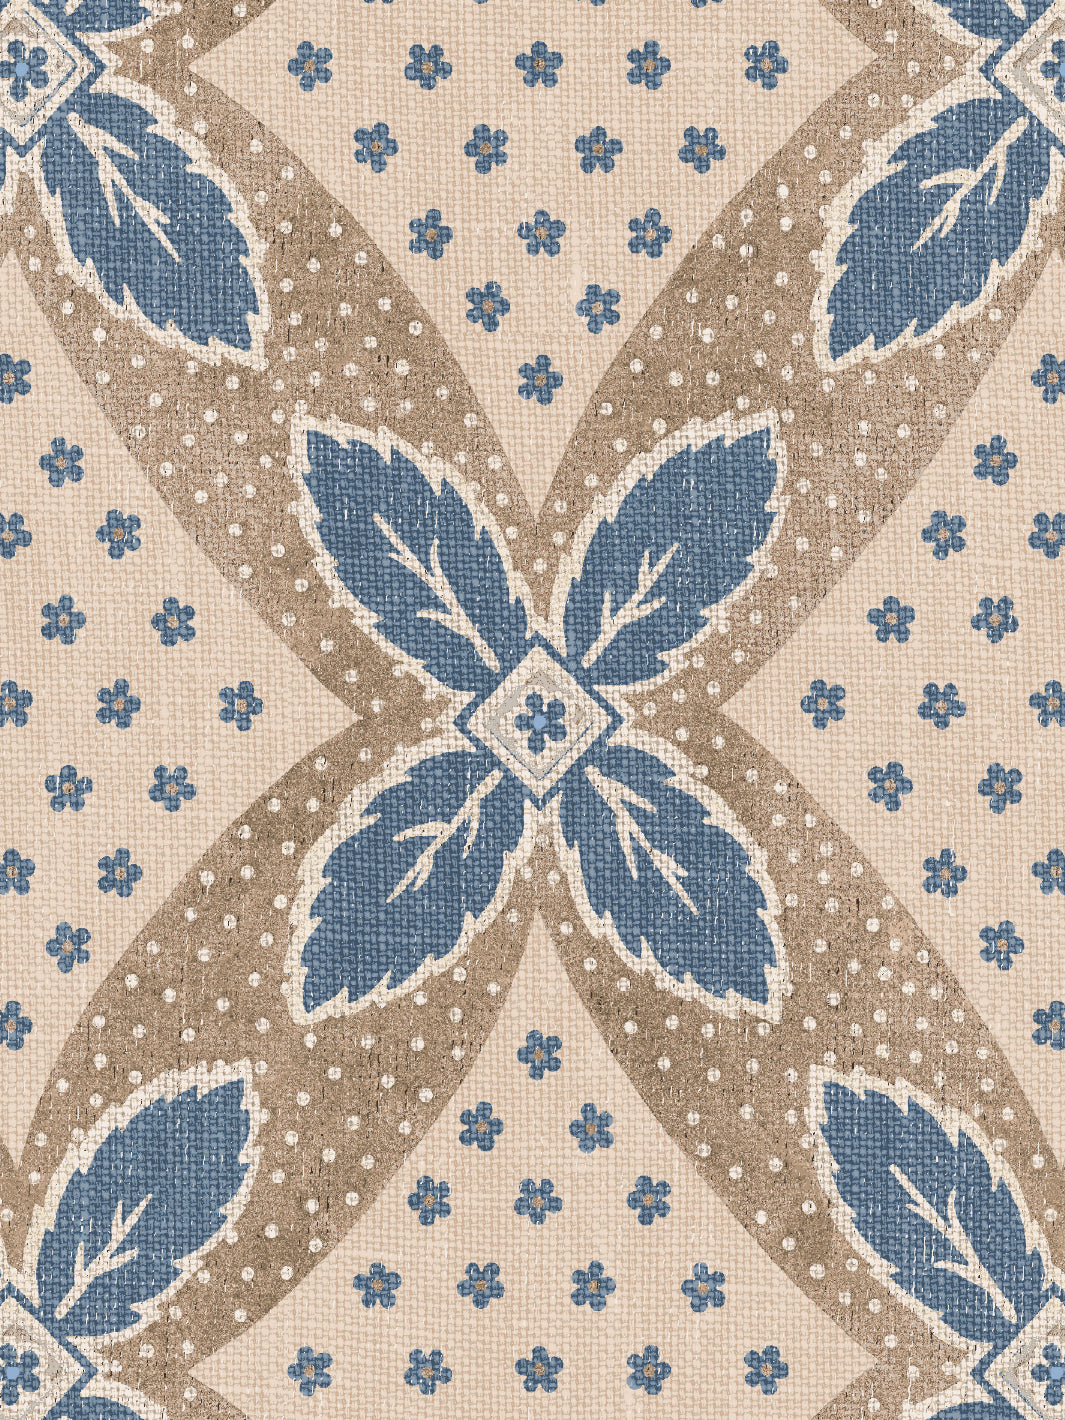 'Arthur' Wallpaper by Nathan Turner - Blue on Taupe